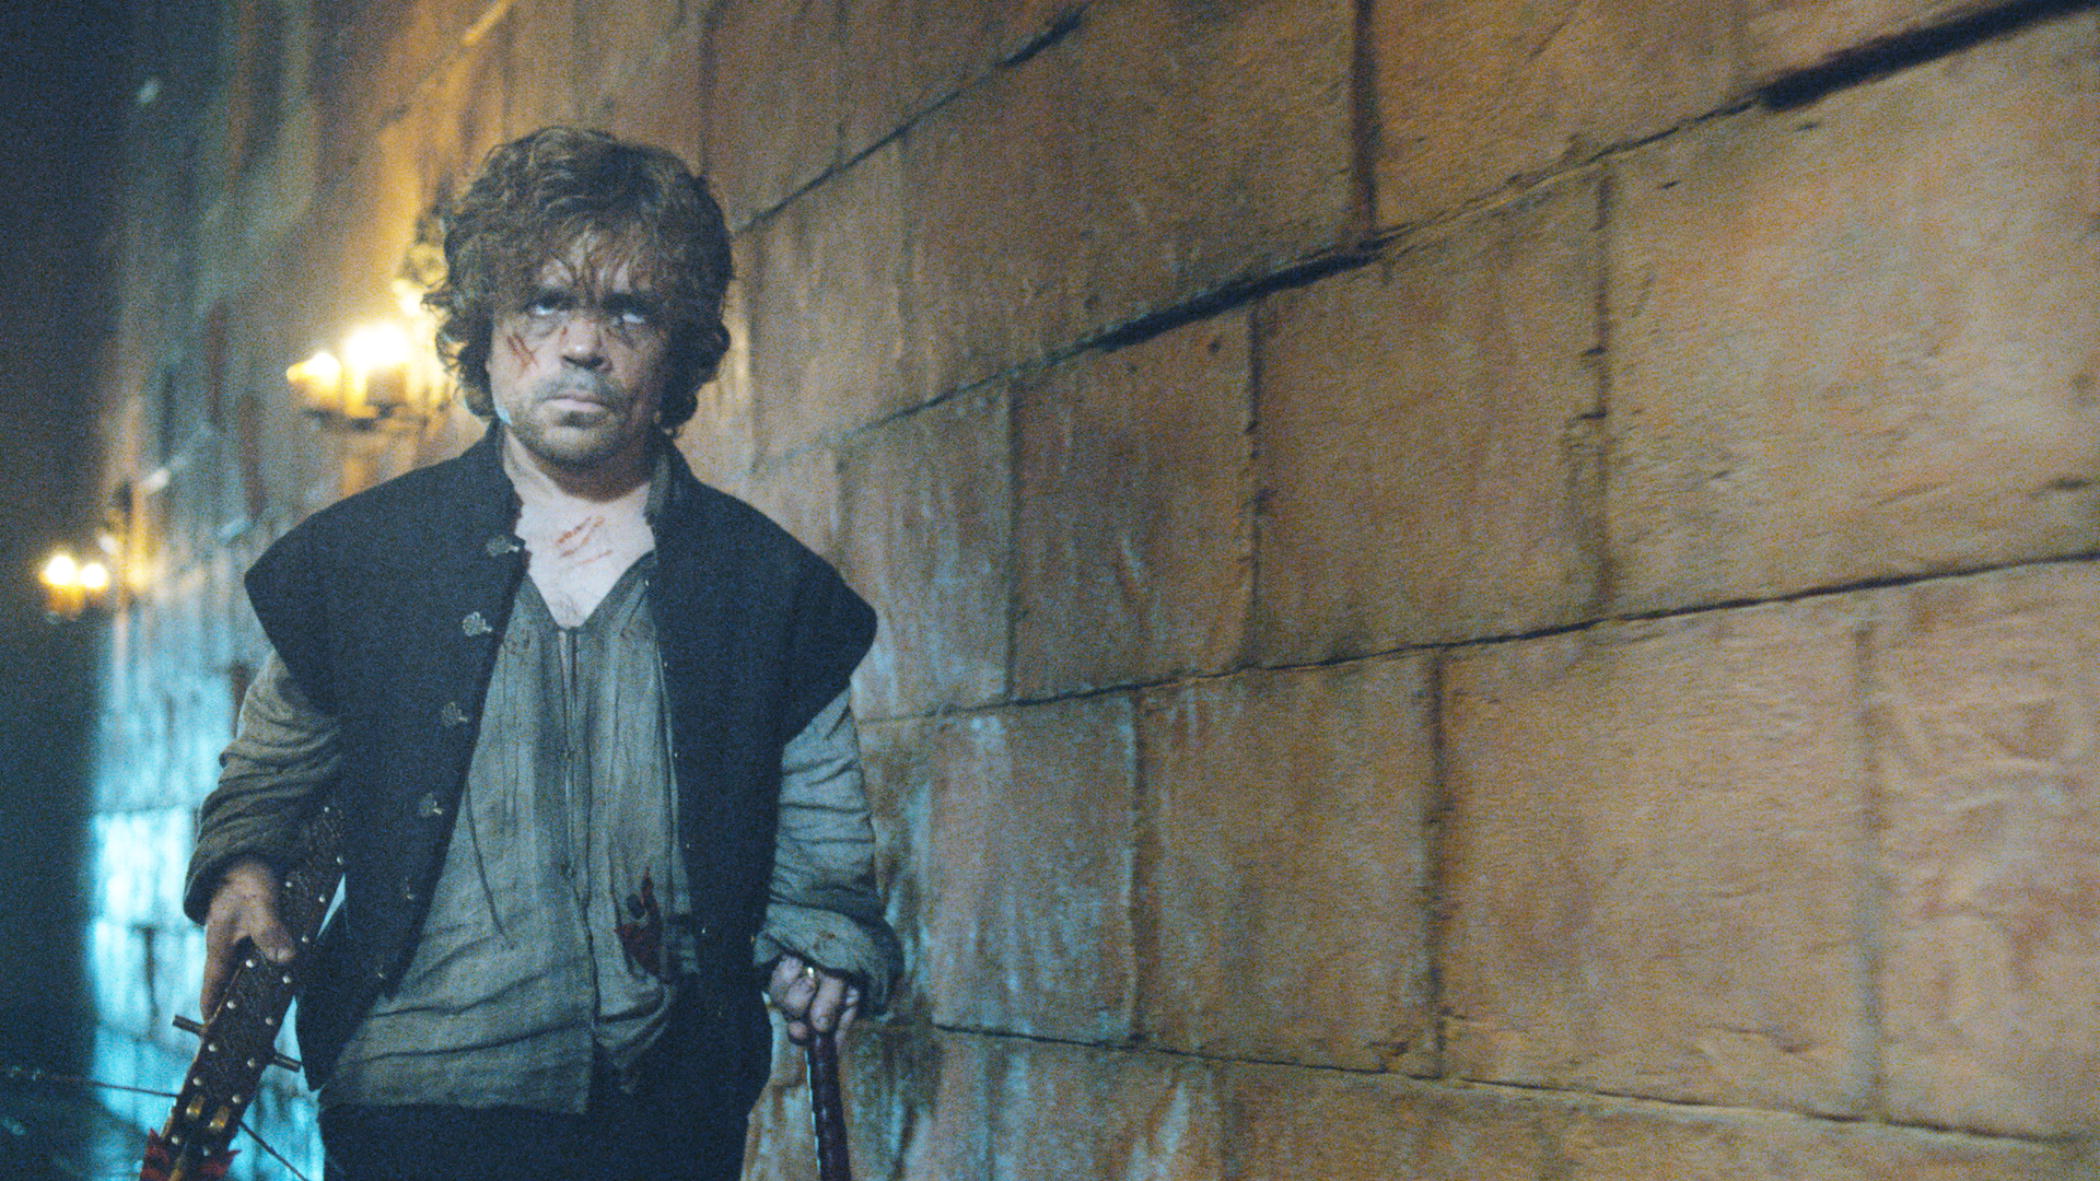 tv show, game of thrones, peter dinklage, tyrion lannister